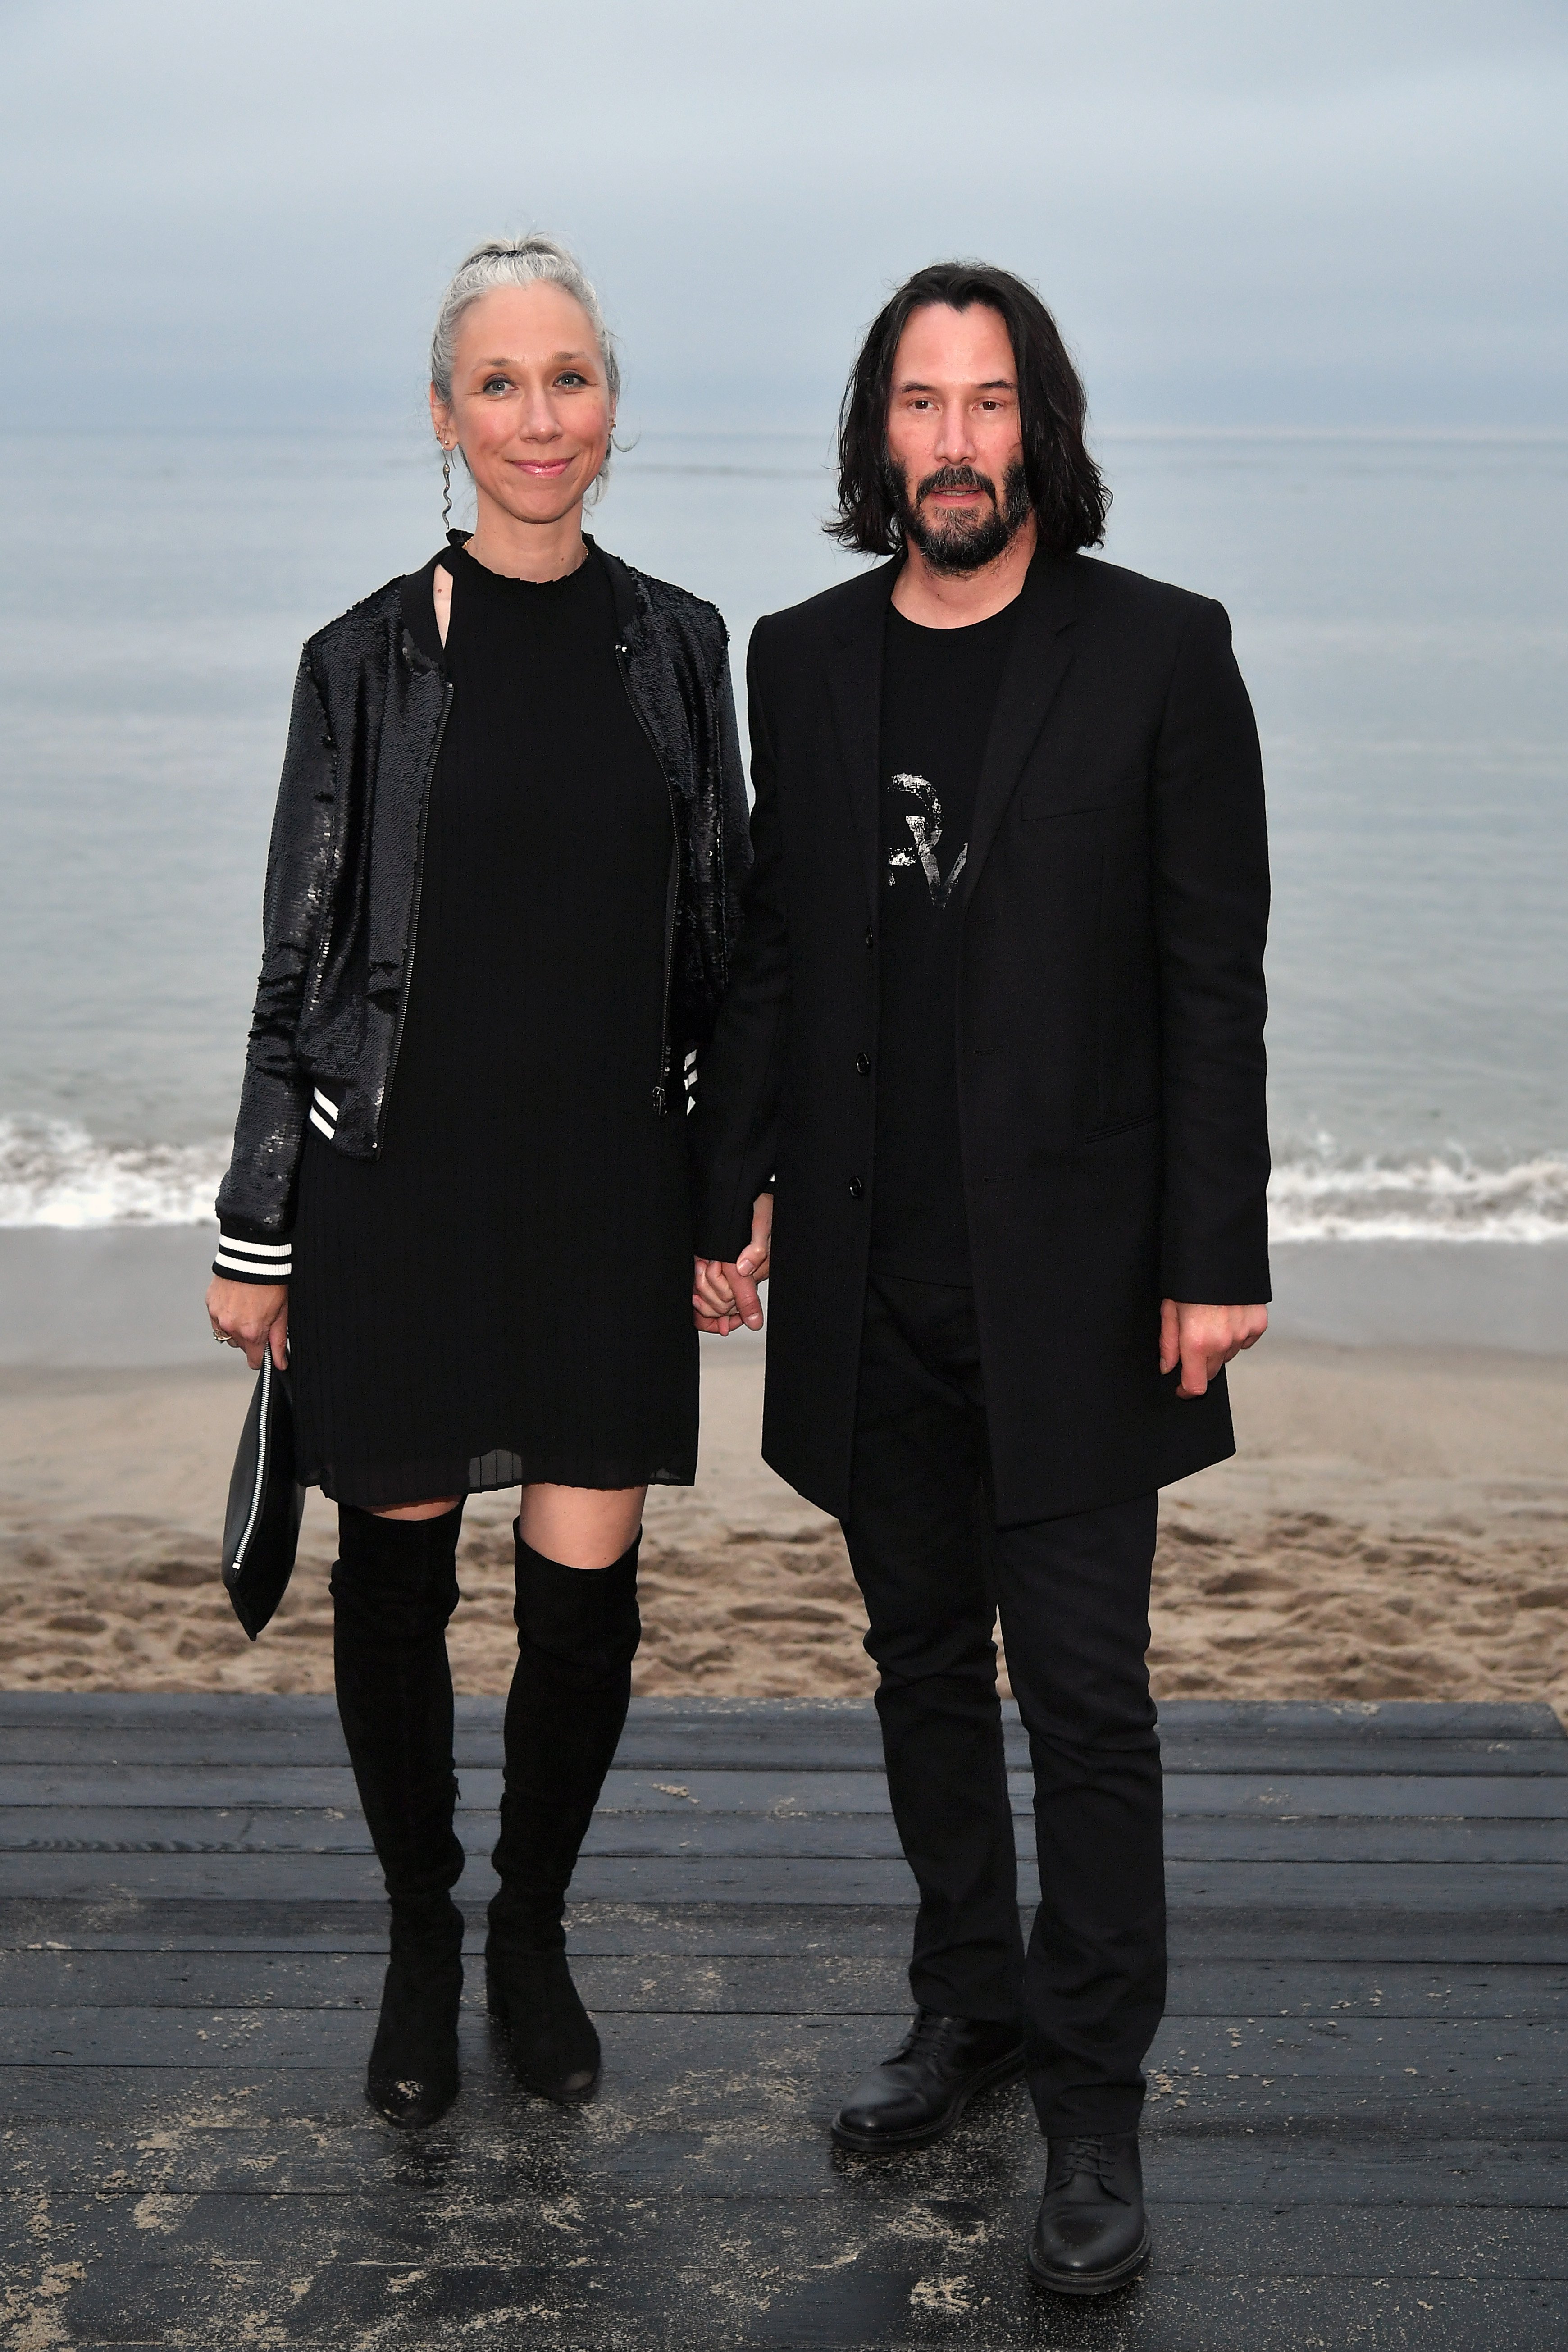 Alexandra Grant and Keanu Reeves attends the Saint Laurent Mens Spring Summer 20 Show on June 06, 2019, in Paradise Cove Malibu, California. | Source: Getty Images.